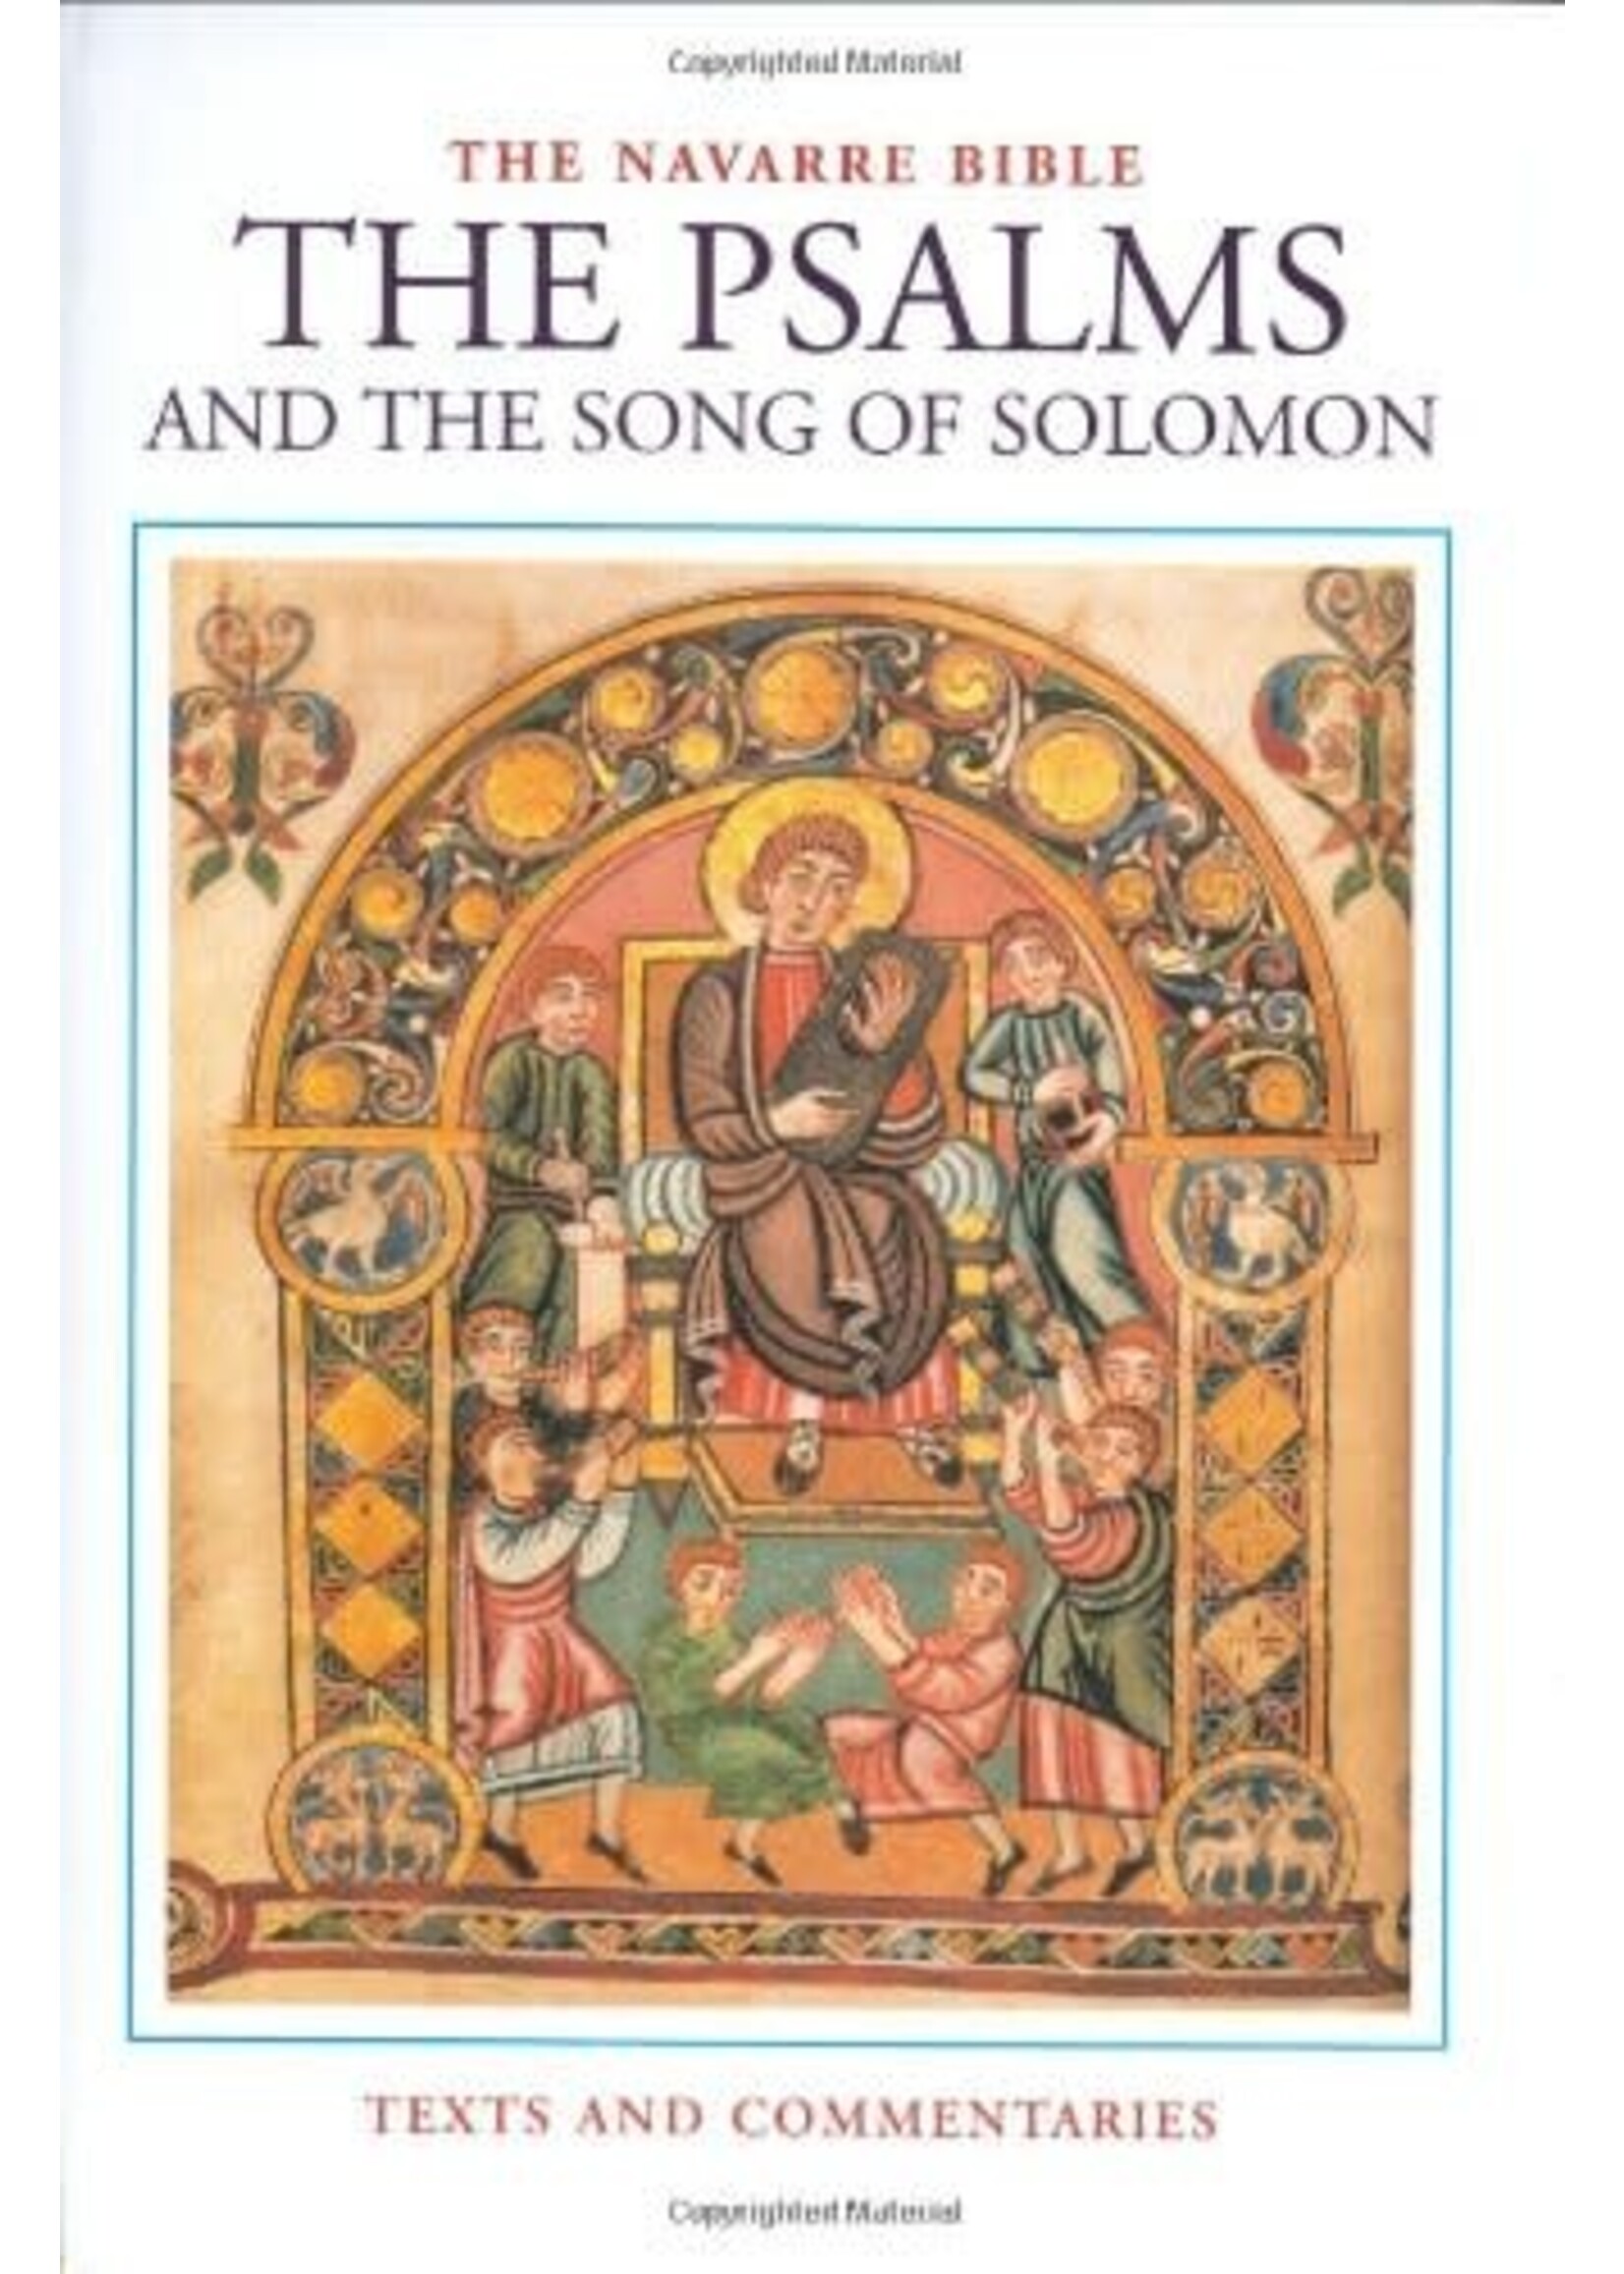 The Navarre Bible: Psalms & Song of Solomon